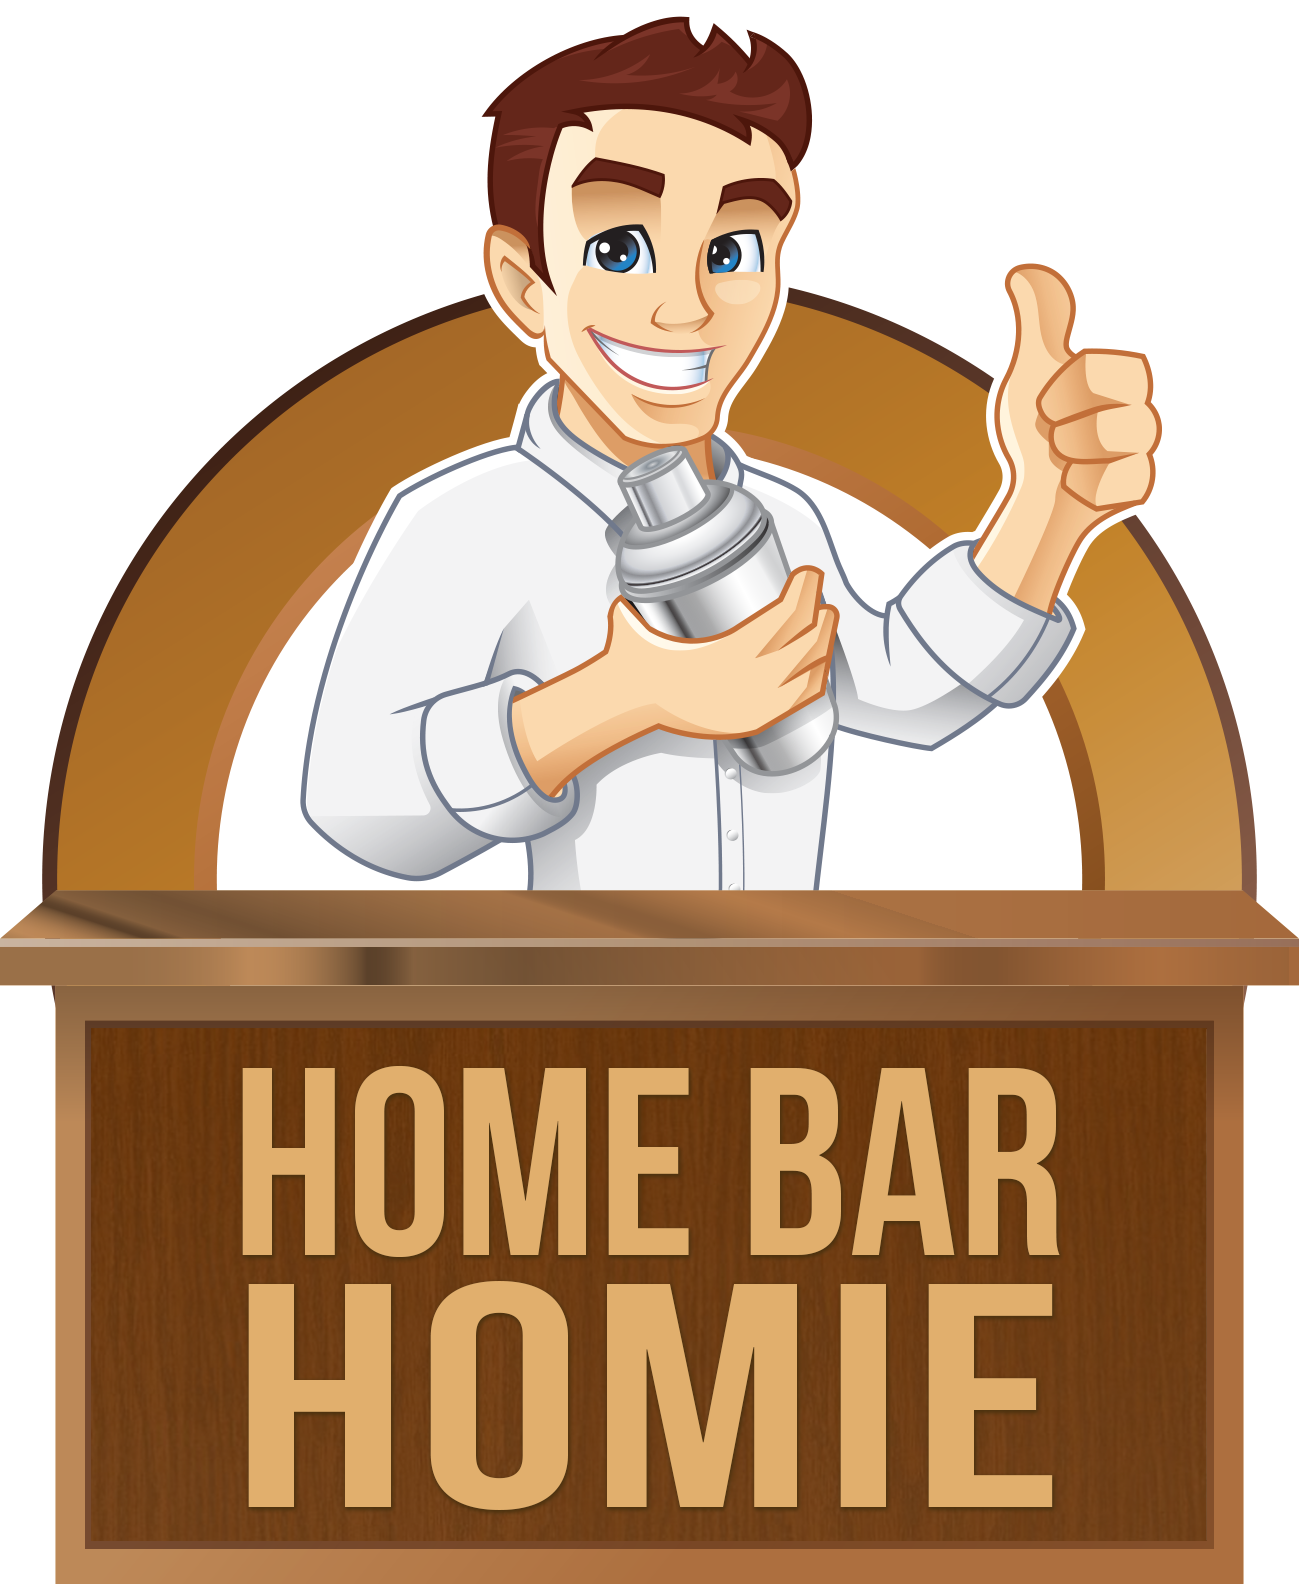 cocktails clipart cheer